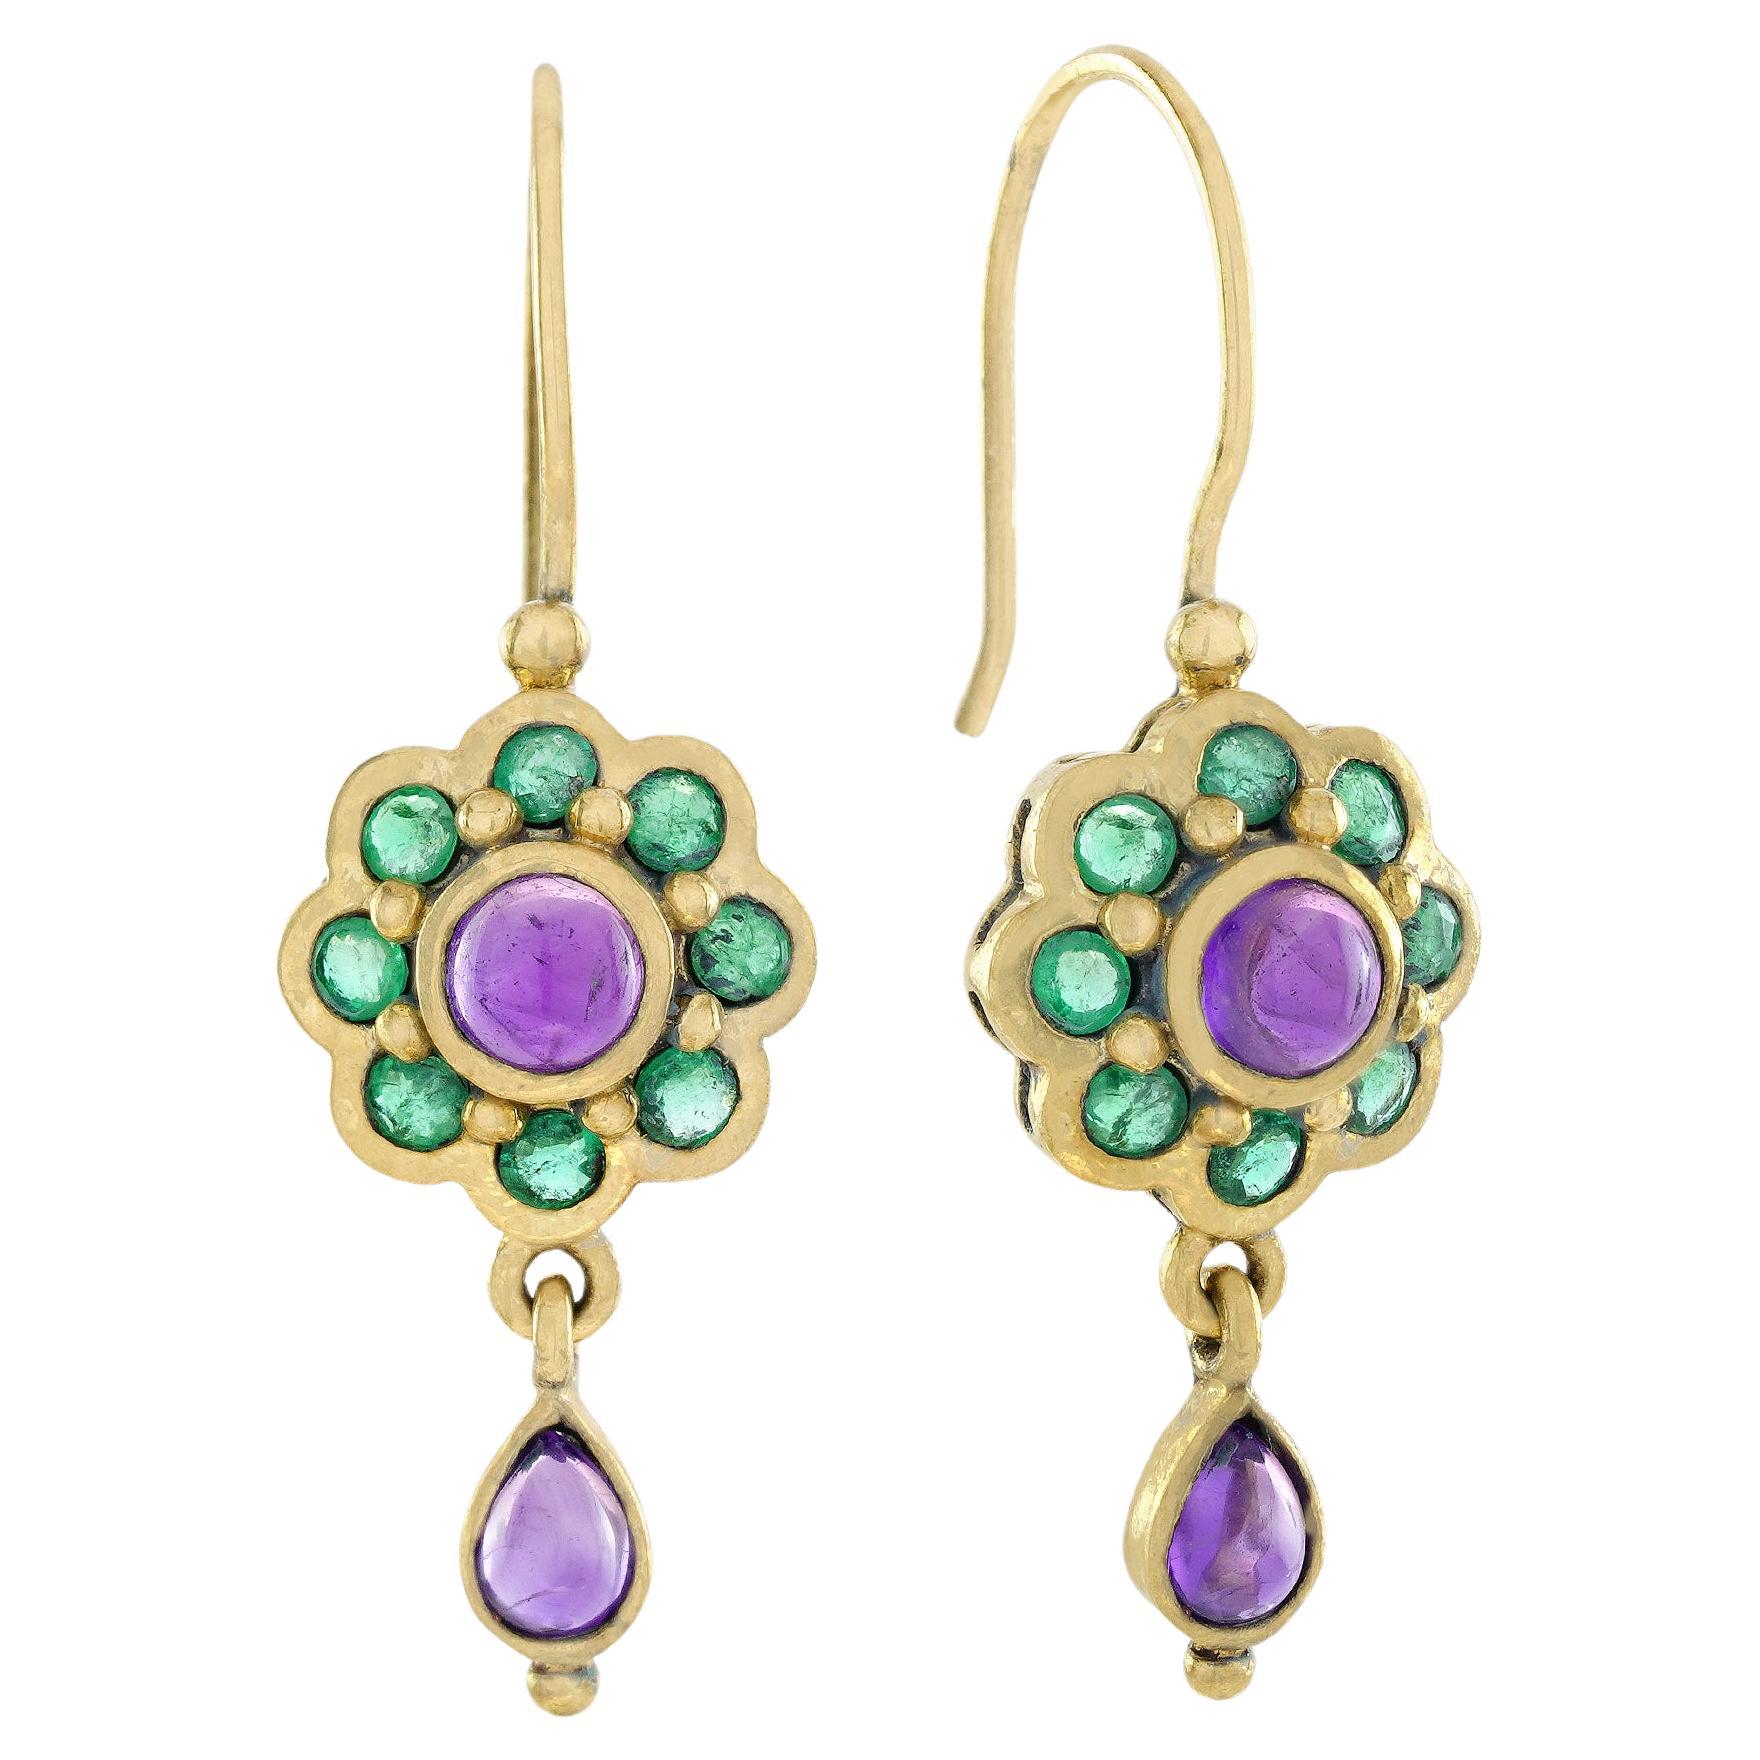 Natural Cabochon Amethyst and Emerald Floral Drop Earrings in 9K Yellow Gold